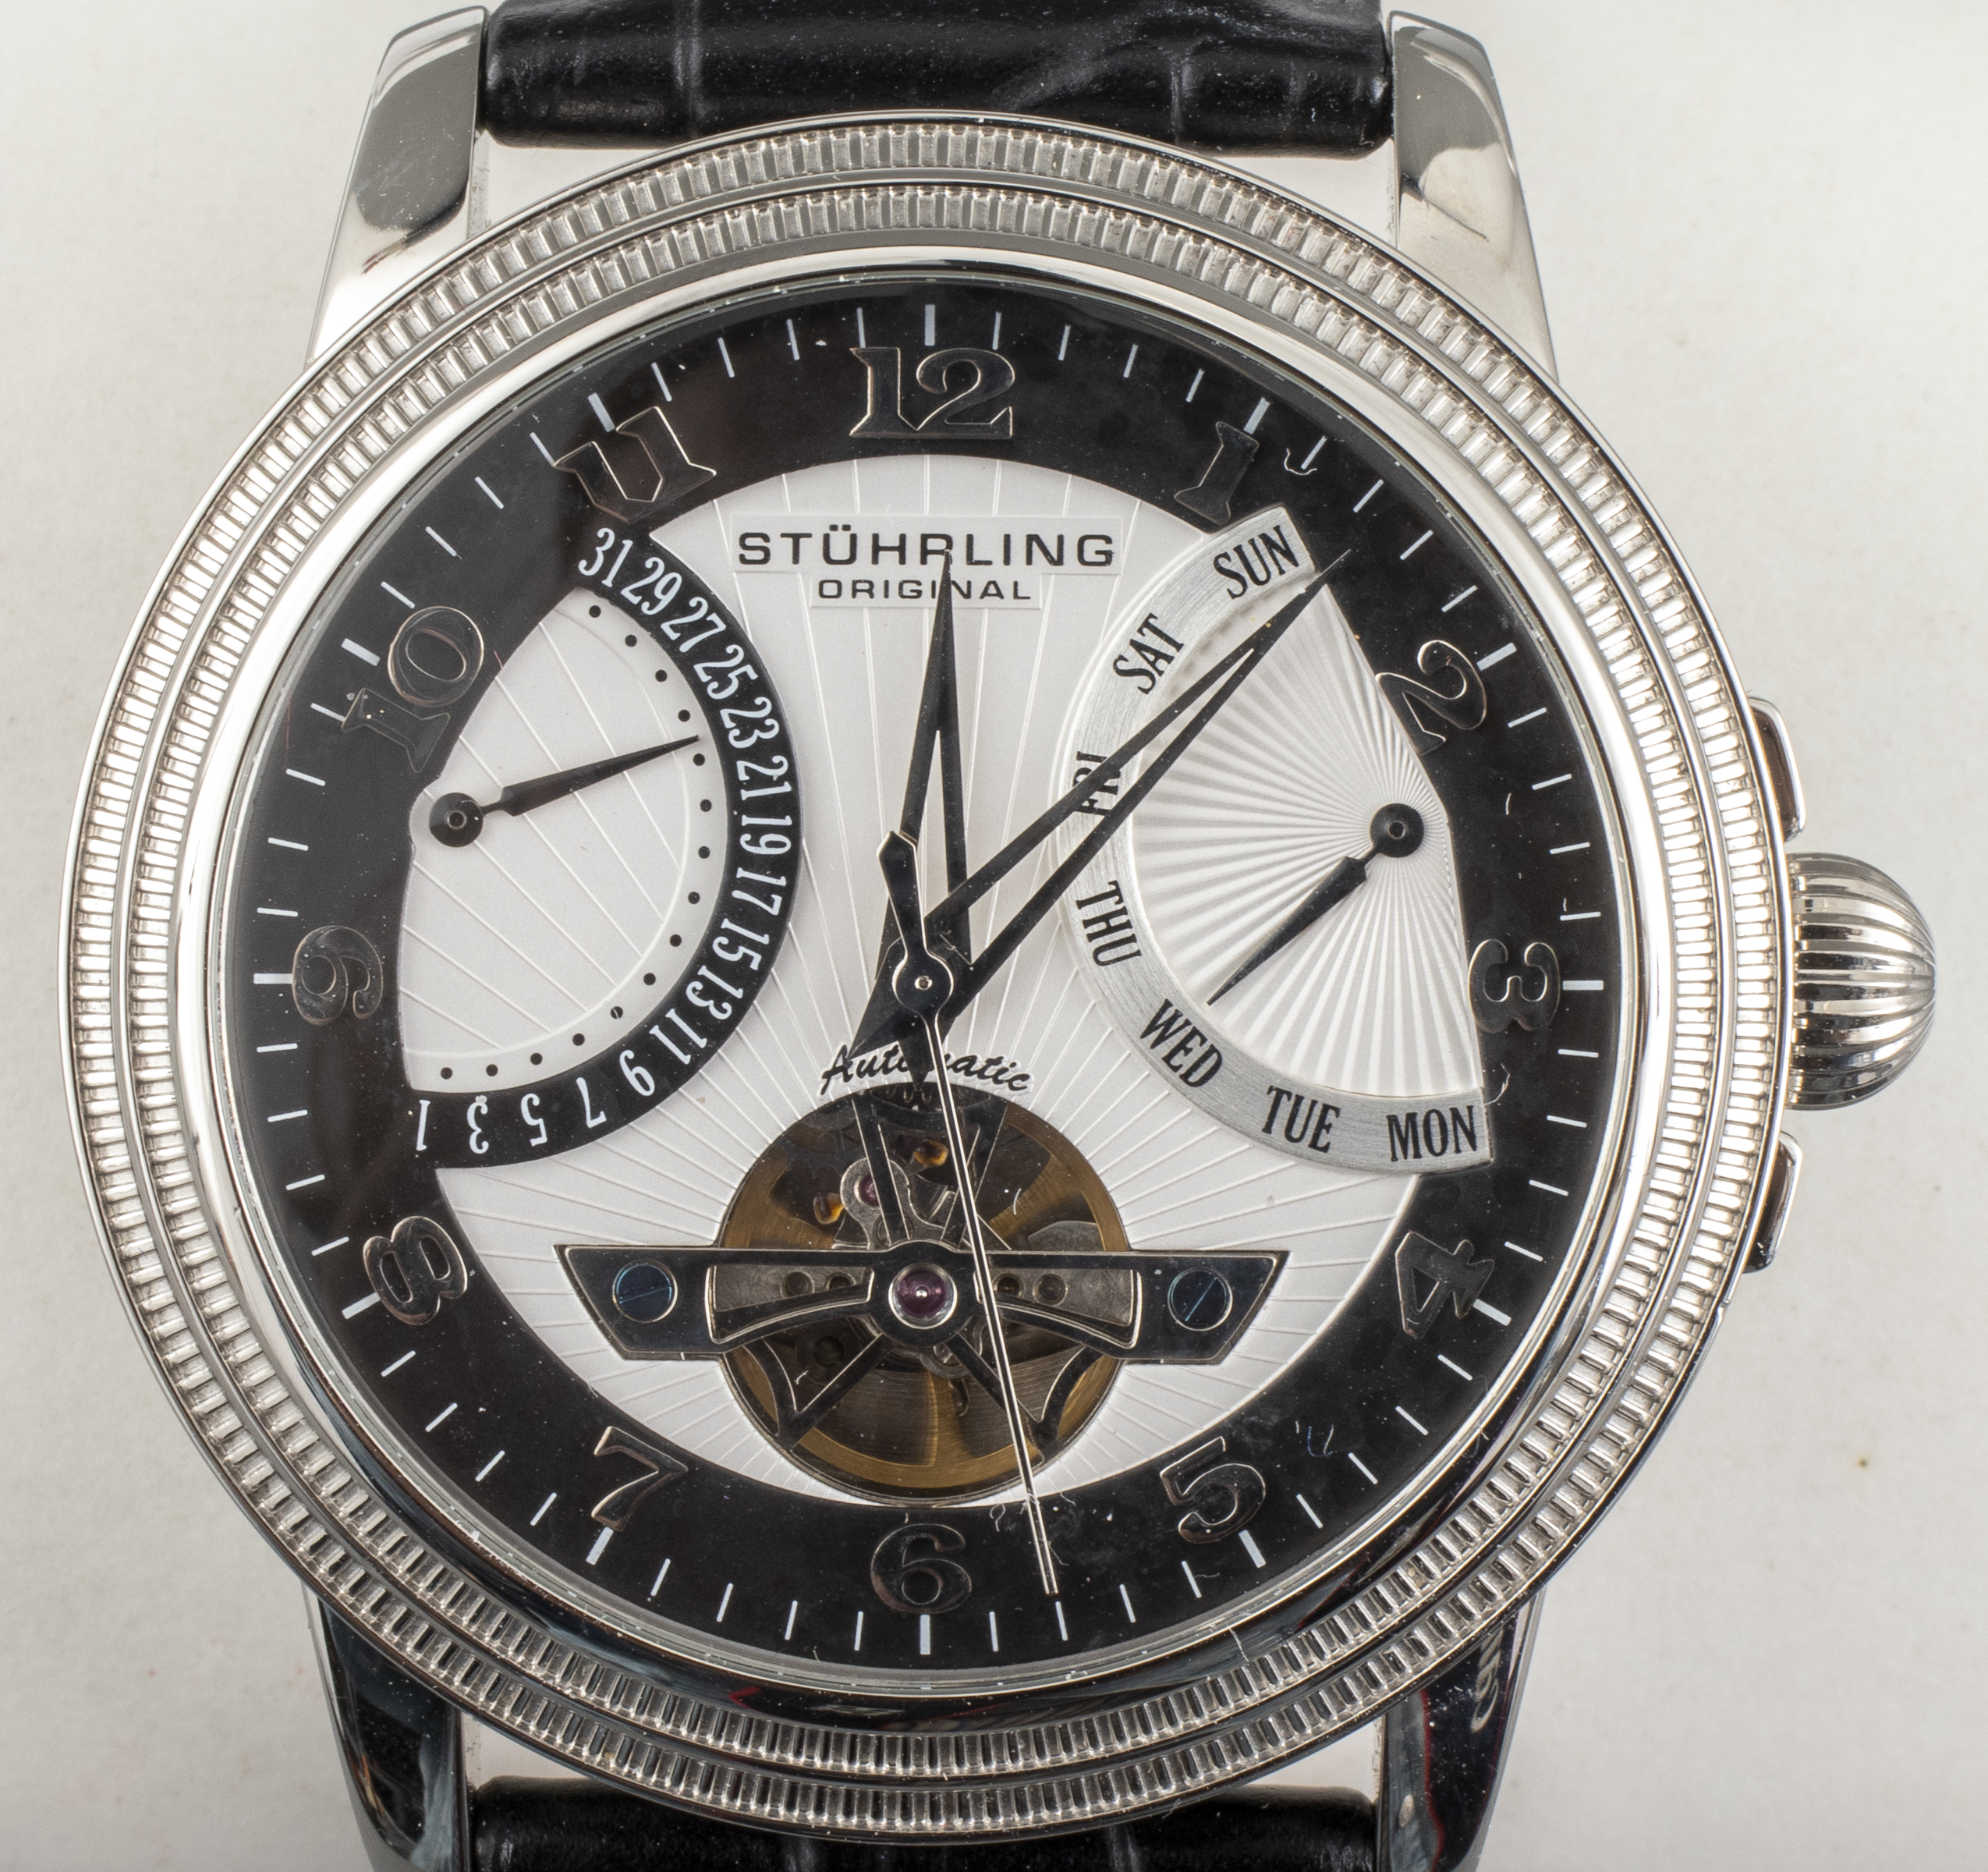 STUHRLING STAINLESS STEEL AUTOMATIC 3c49db